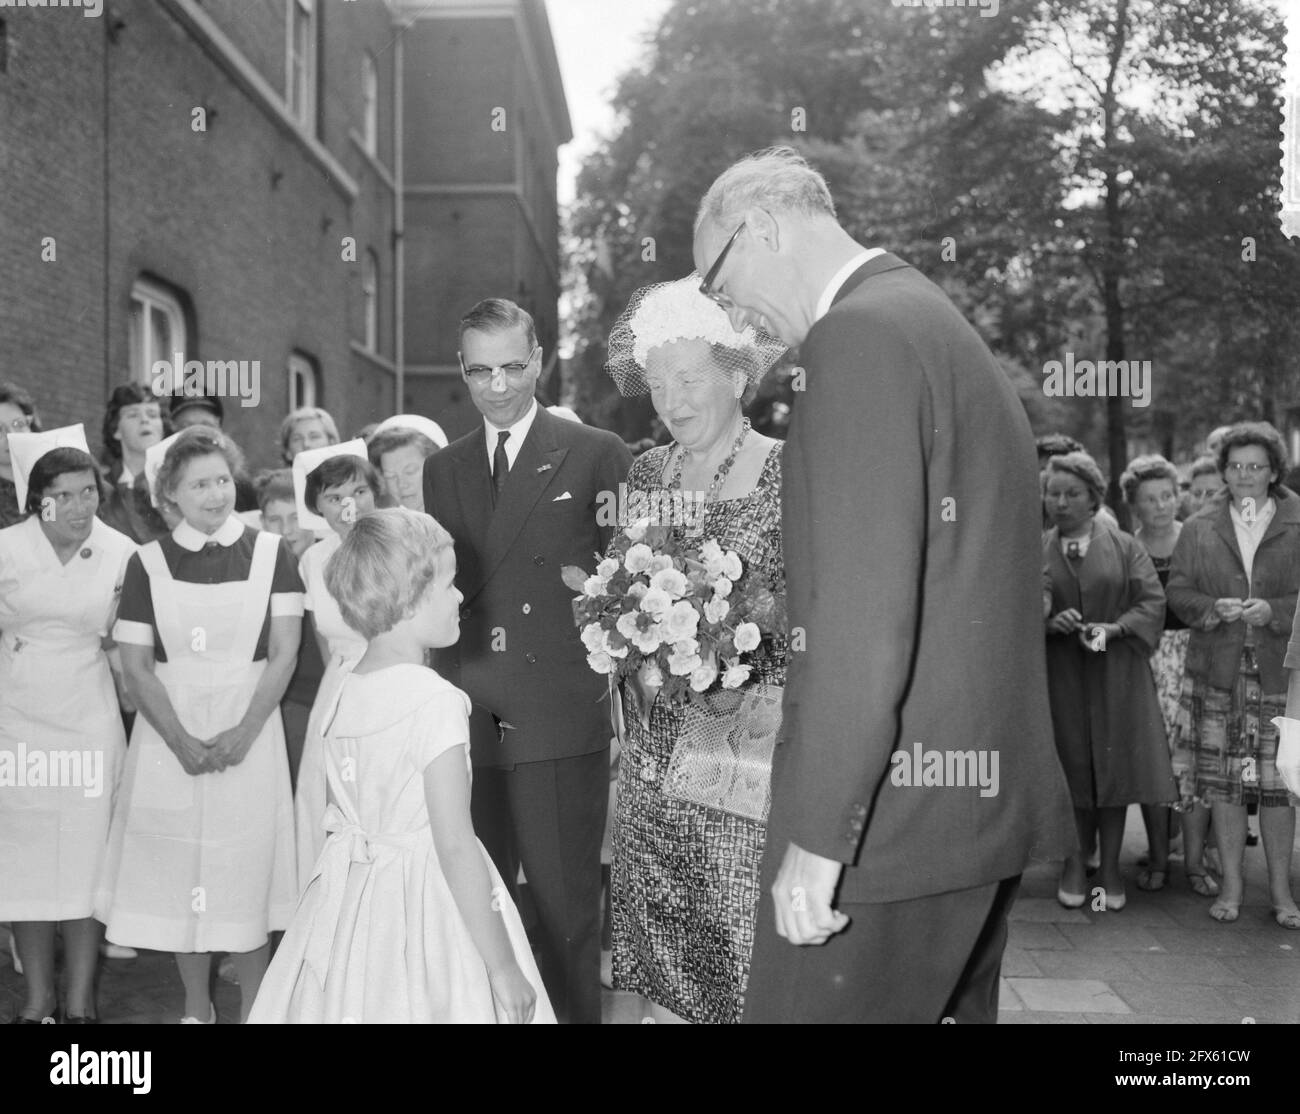 H. M. the Queen visits the Ant. van Leeuwenhoek House Flowers are offered to the Queen, June 20, 1961, FLOWERS, offers, queens, The Netherlands, 20th century press agency photo, news to remember, documentary, historic photography 1945-1990, visual stories, human history of the Twentieth Century, capturing moments in time Stock Photo